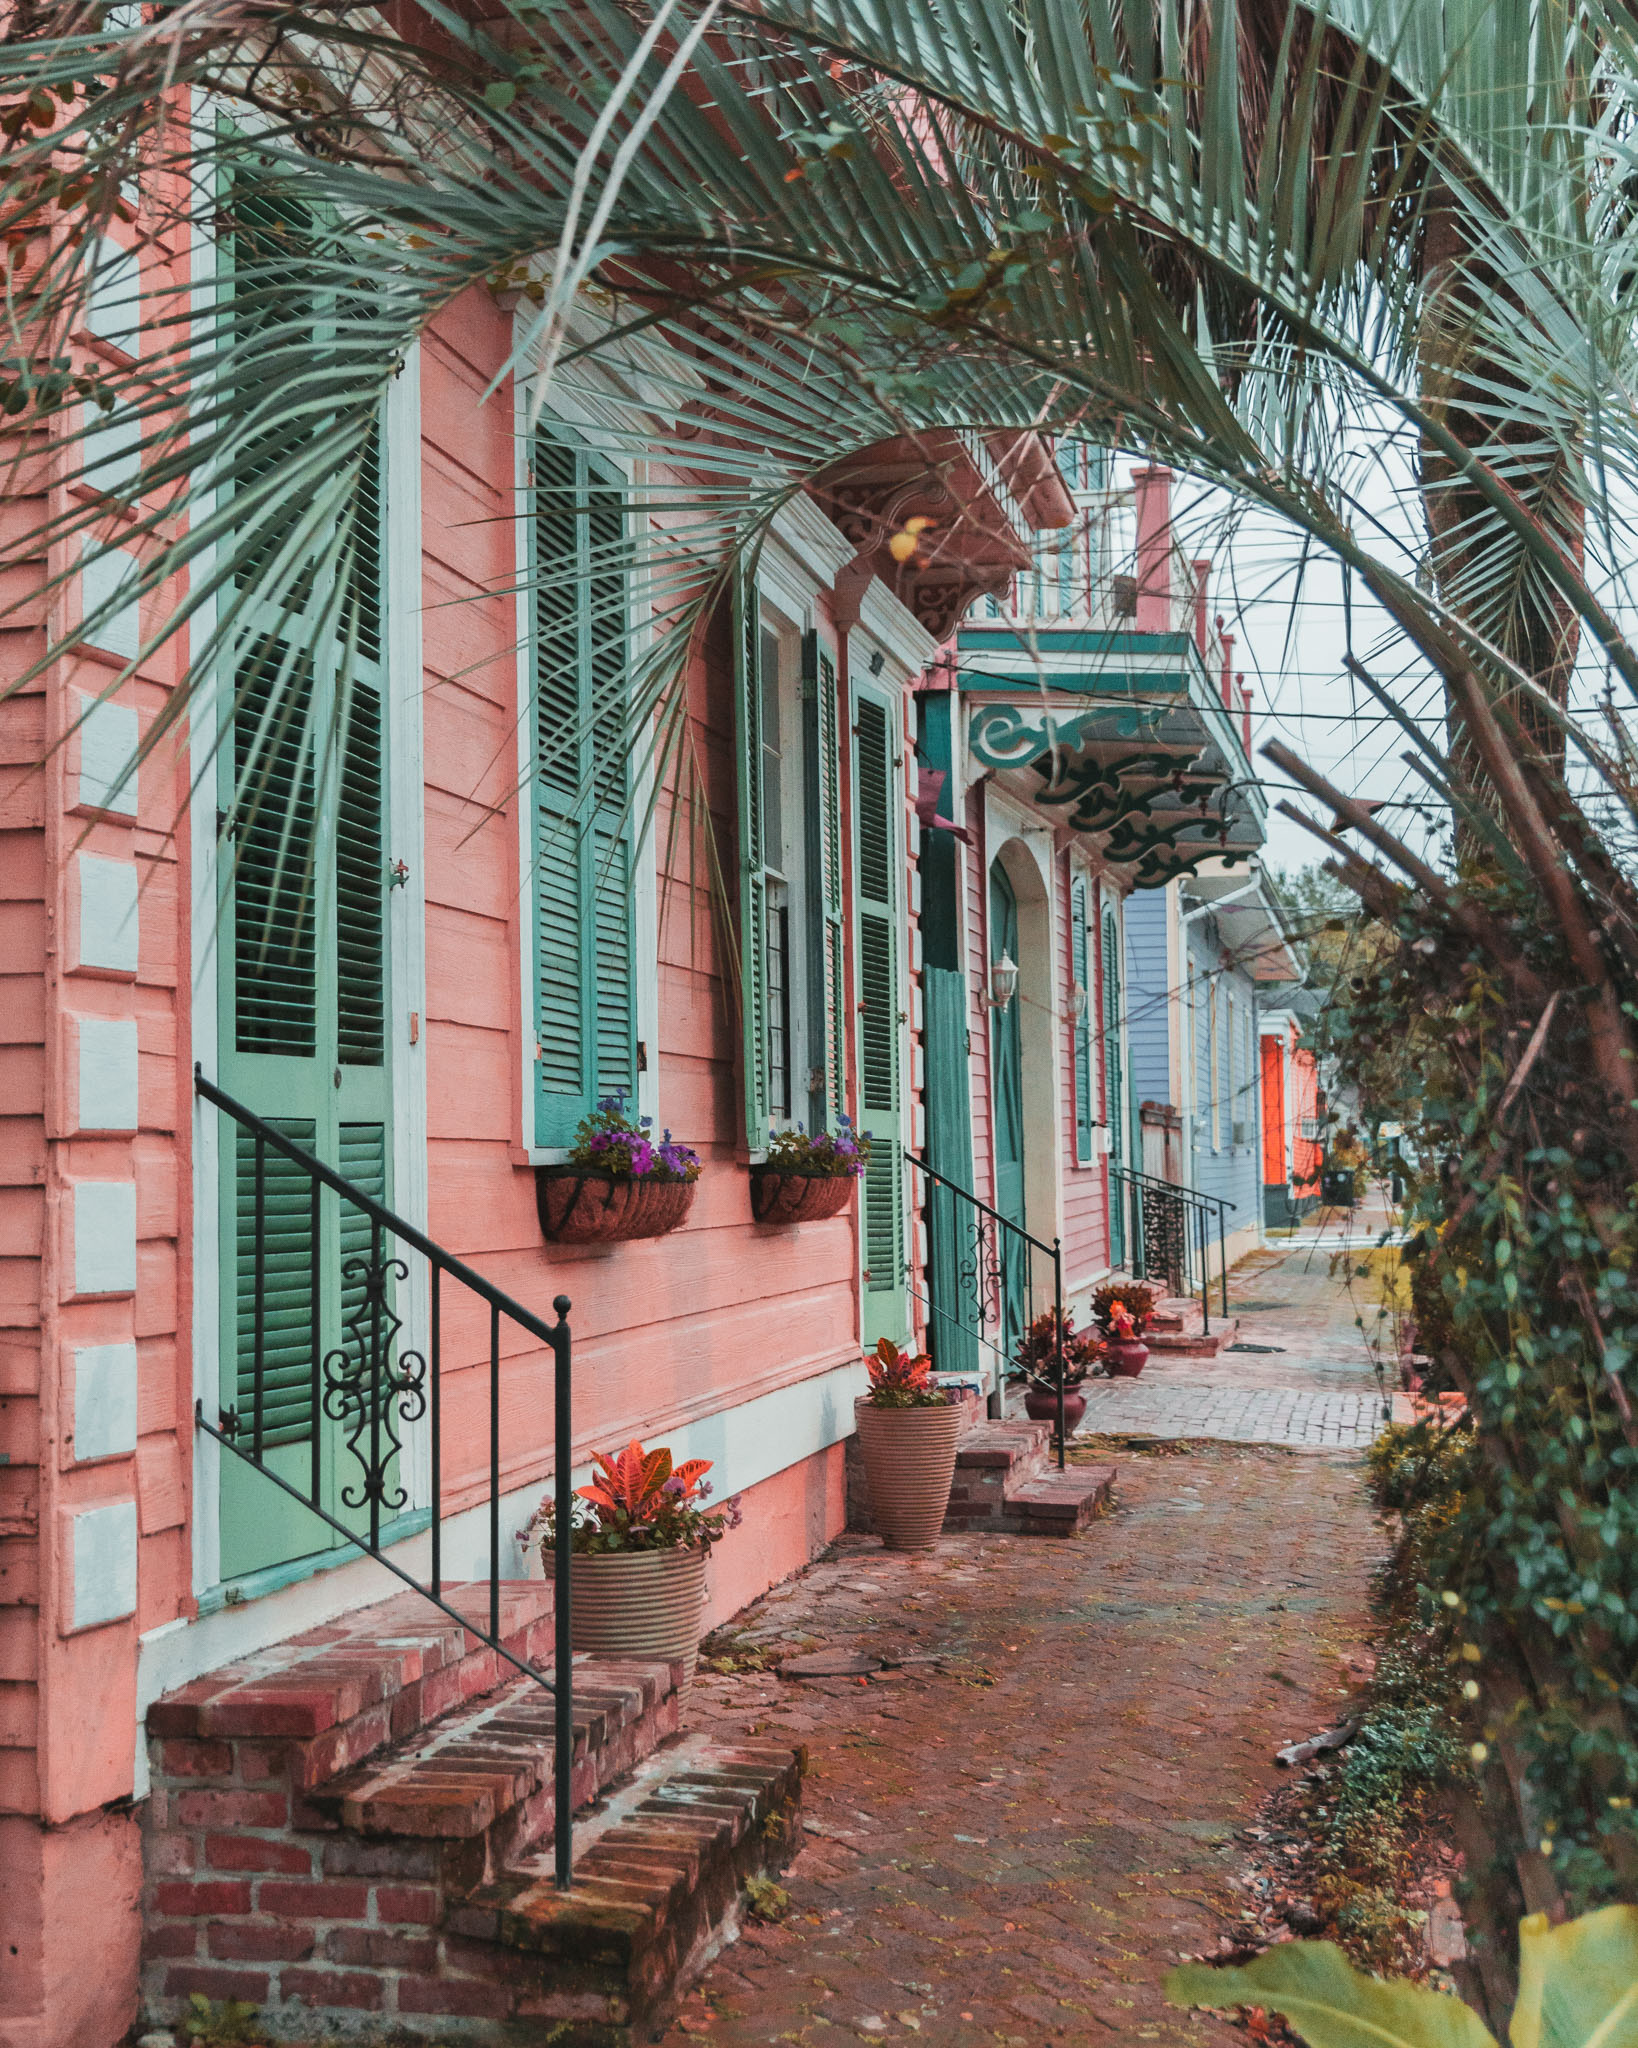 Colorful houses in the Garden District // The Most Instagrammable Spots in New Orleans // #readysetjetset www.readysetjetset.net